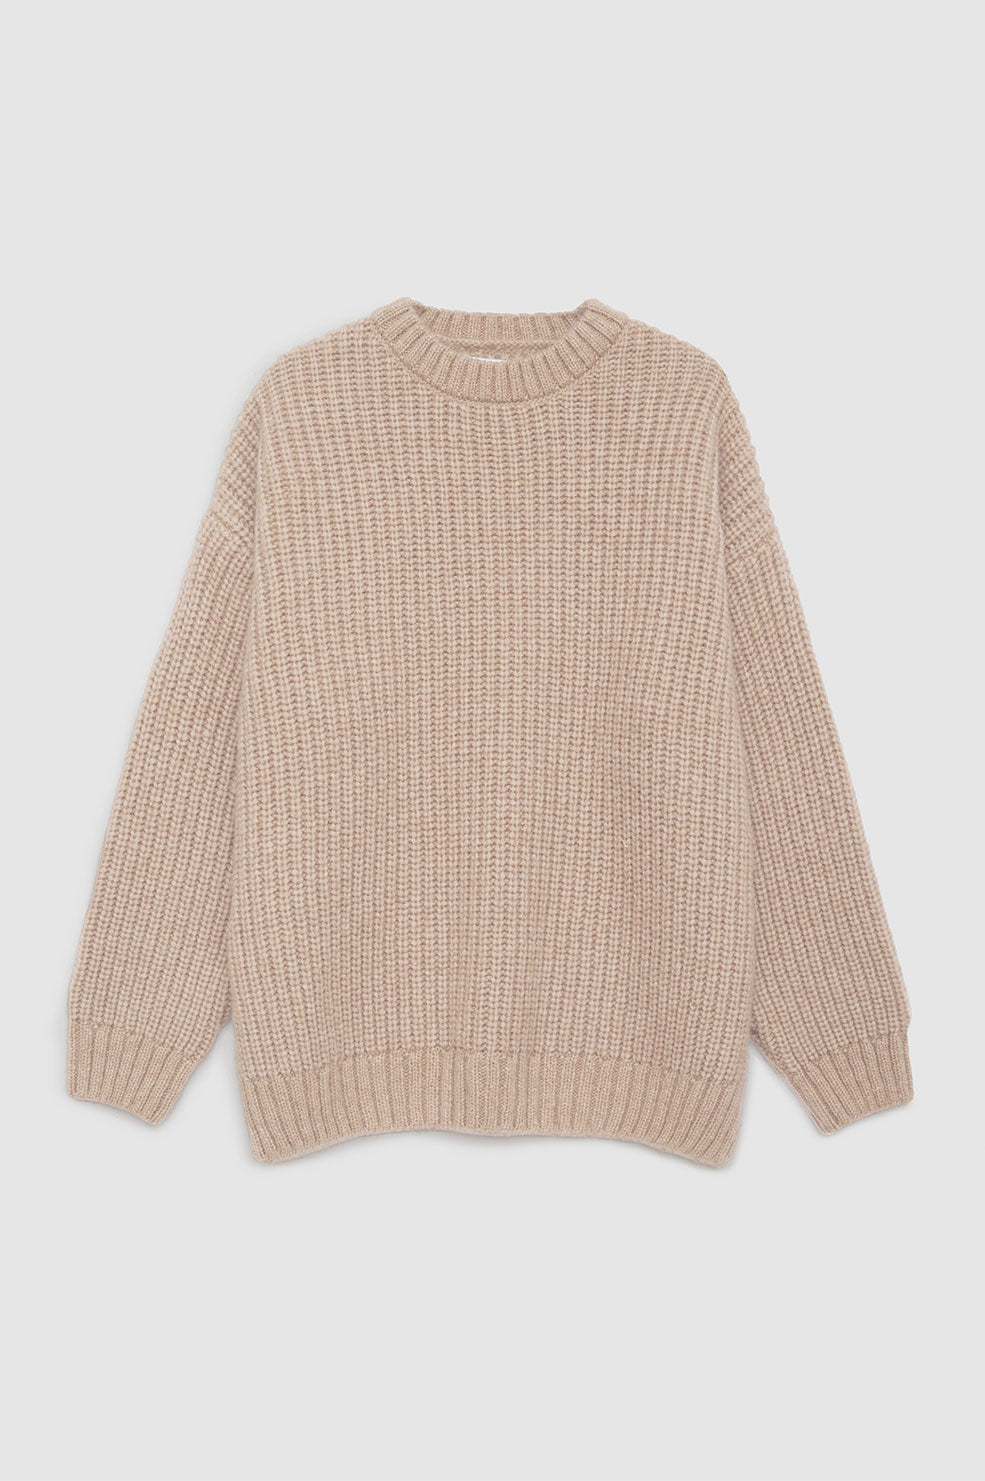 ANINE BING Sydney Crew Sweater - Camel - Front View